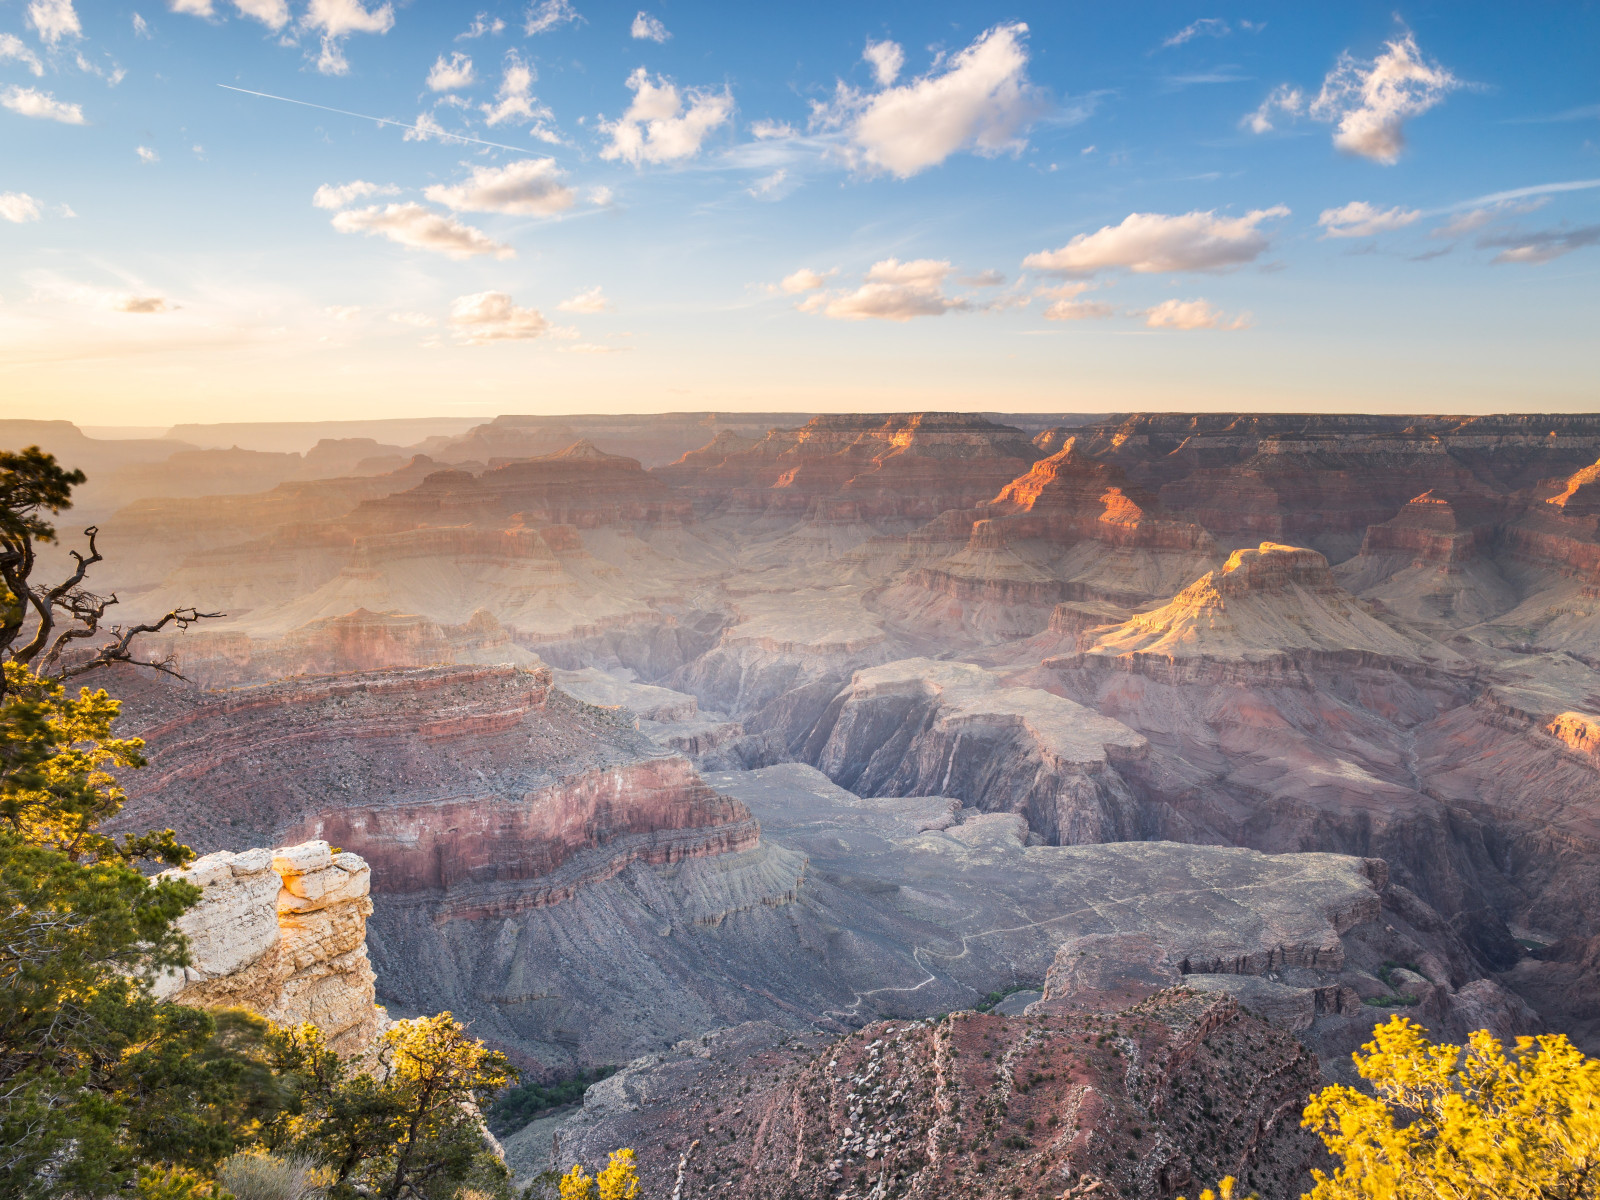 Sunset over the Grand Canyon wallpaper 1600x1200